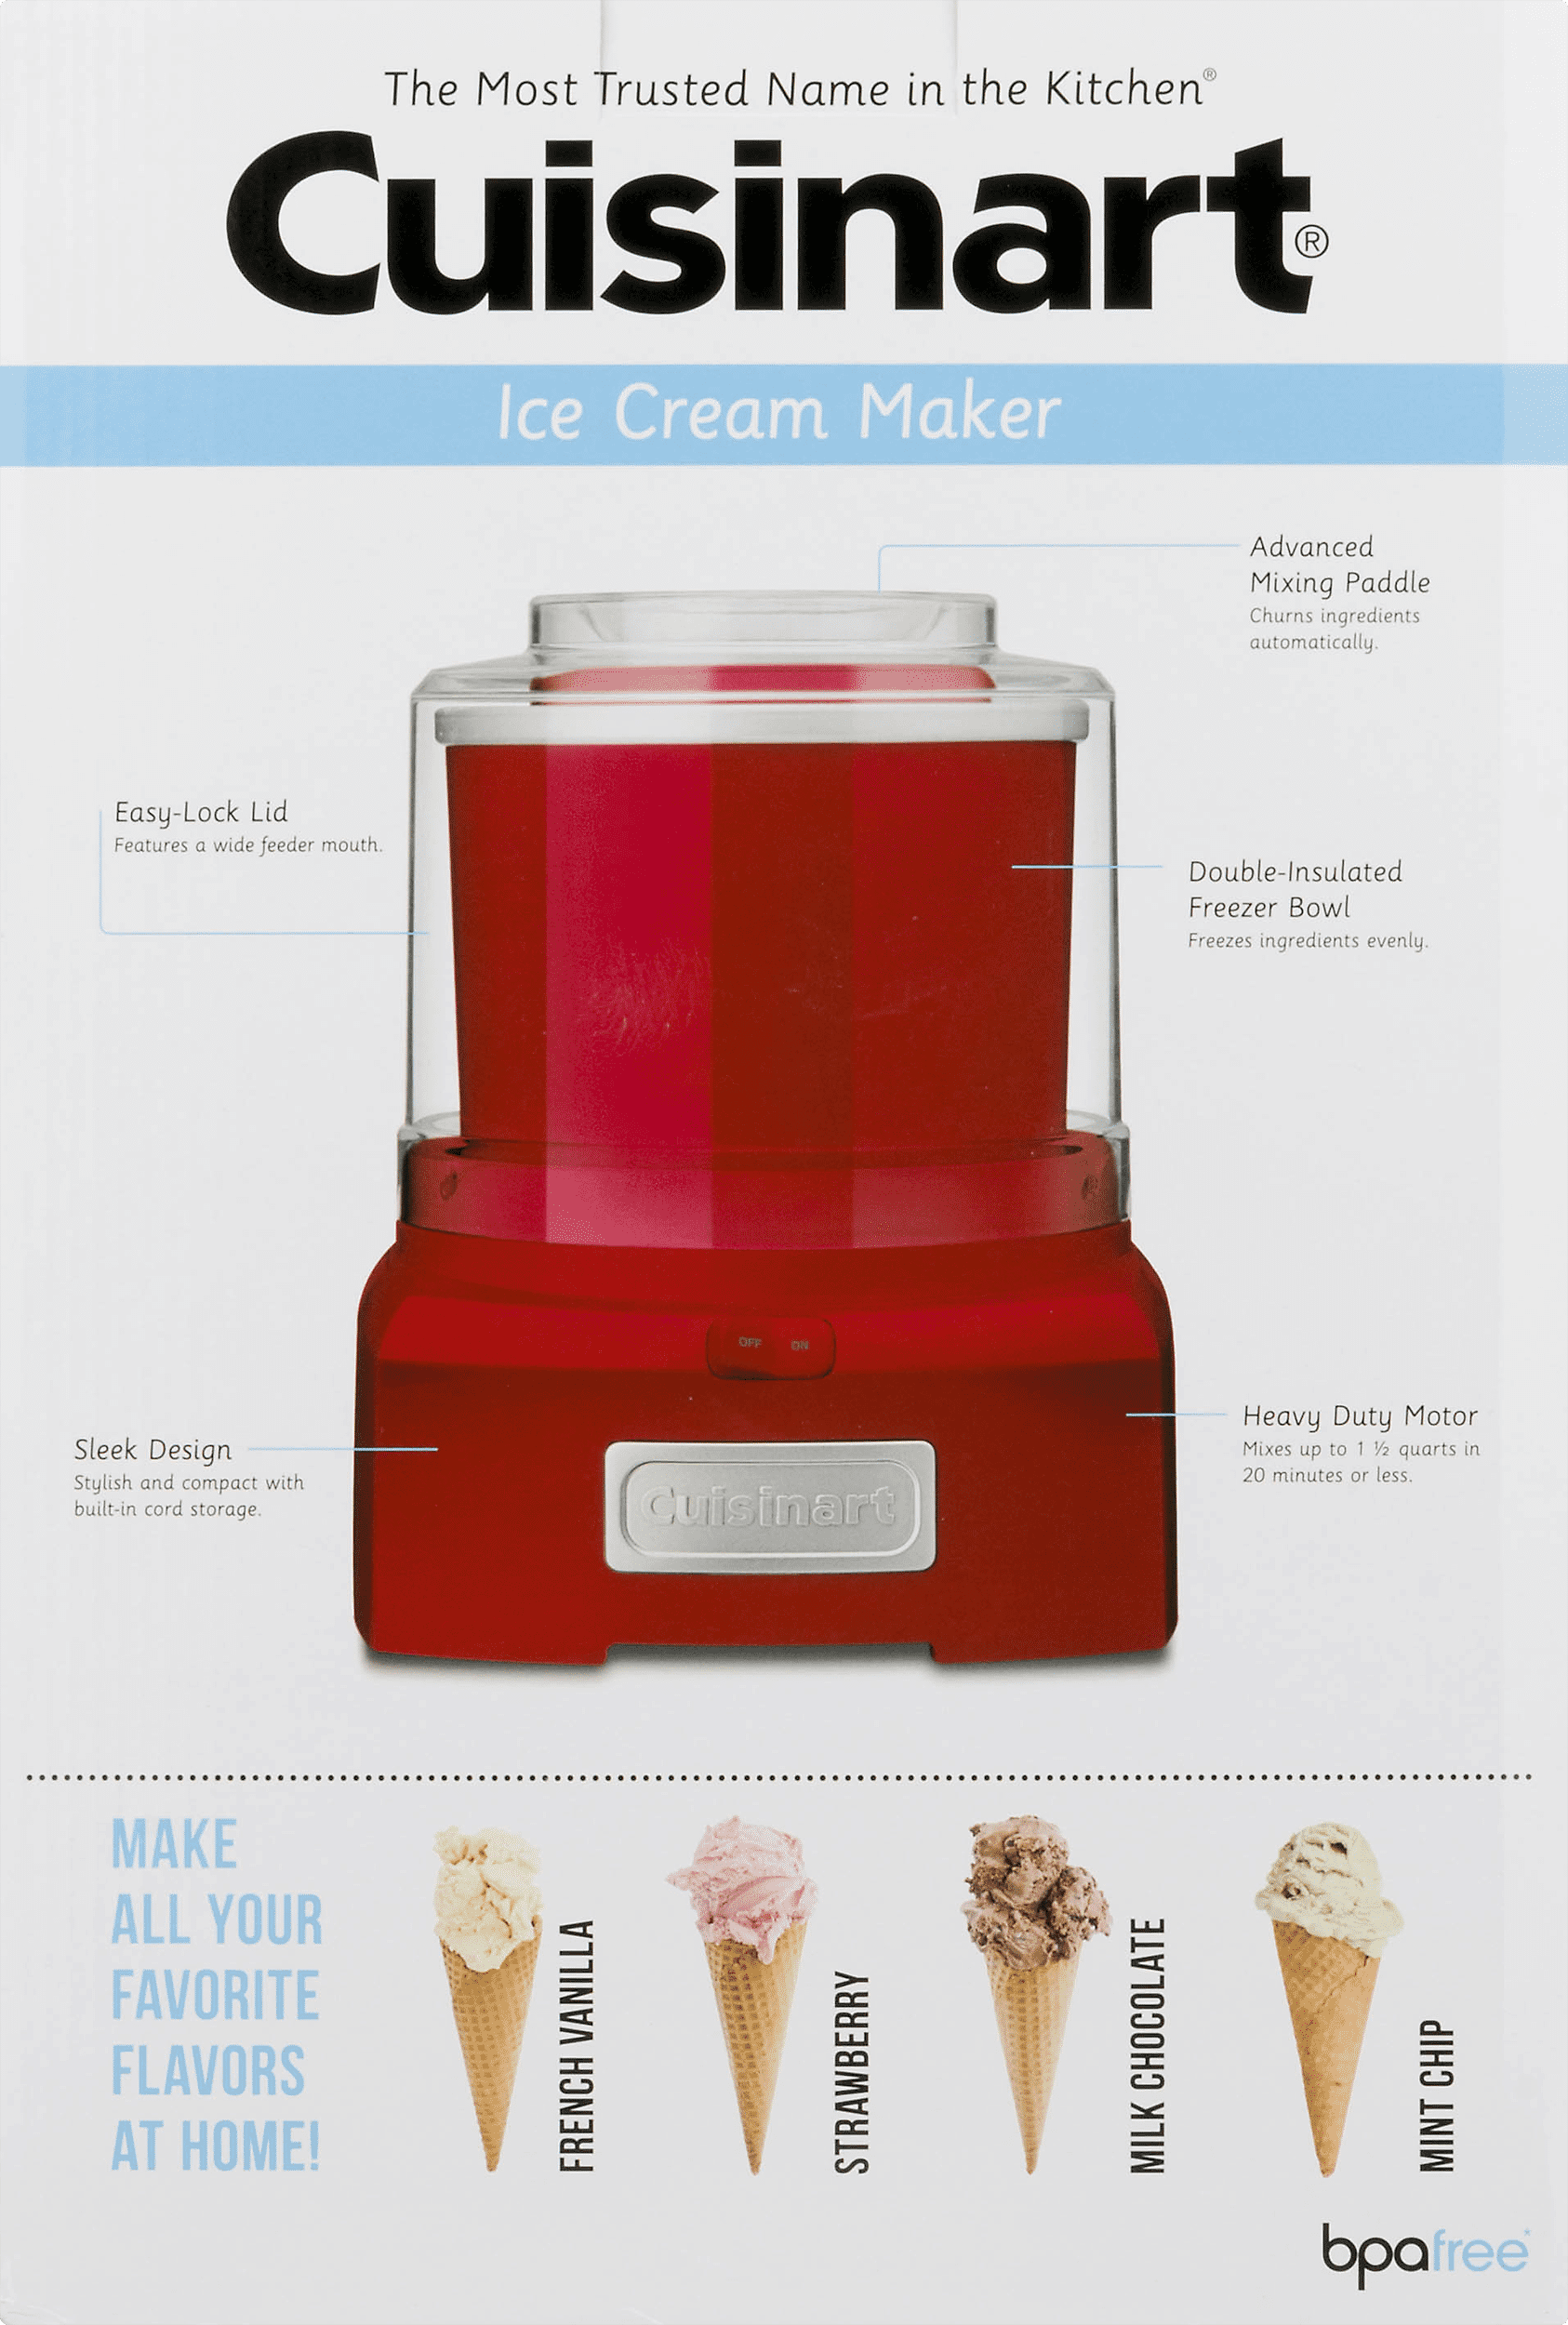  Cuisinart Ice Cream Maker Machine for Frozen Yogurt, Sorbet,  Gelato, Ice Cream & Frozen Drinks - Makes Treats in Minutes with Large  Ingredient Spout for Mix ins, Stainless Steel/Red, 2 Quart